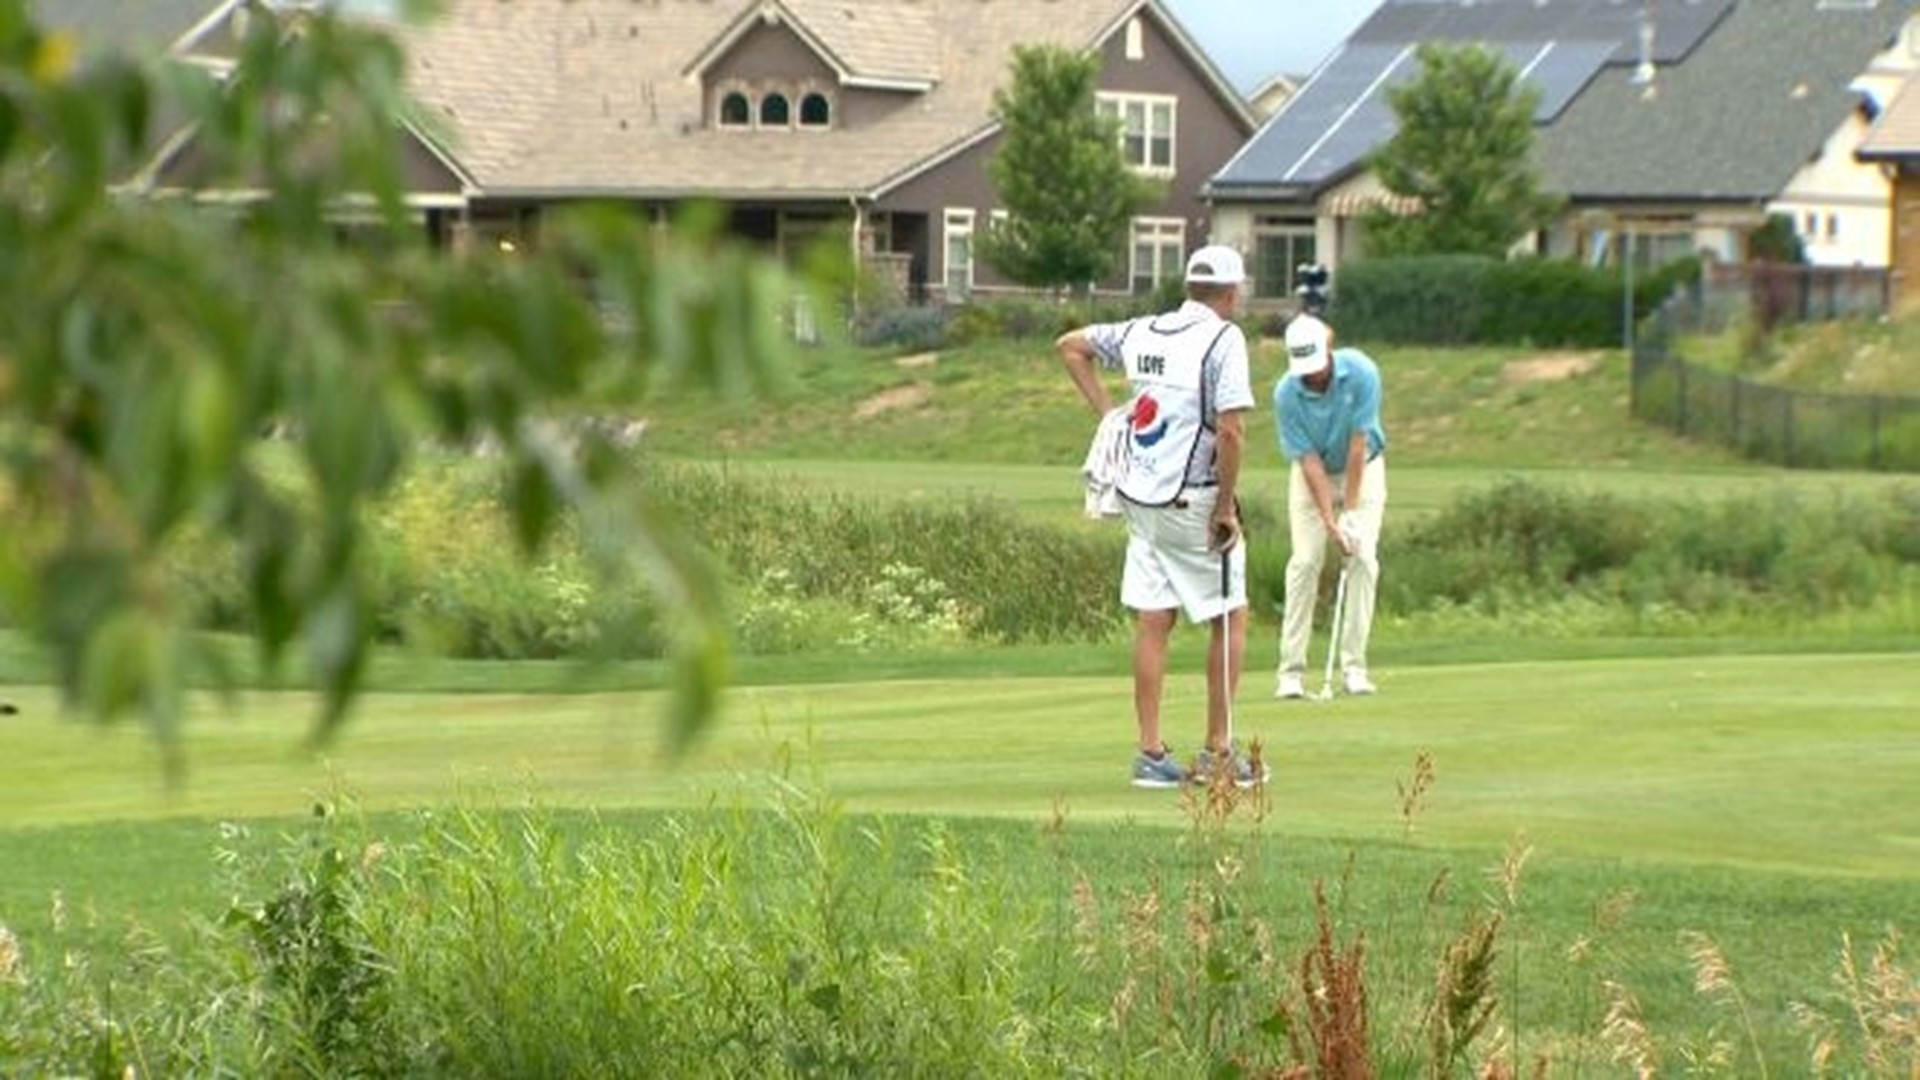 Former PGA world number one golfer David Duval golfed against his son Brady, while former Ryder Cup captain Davis Love III caddied for his son Dru.